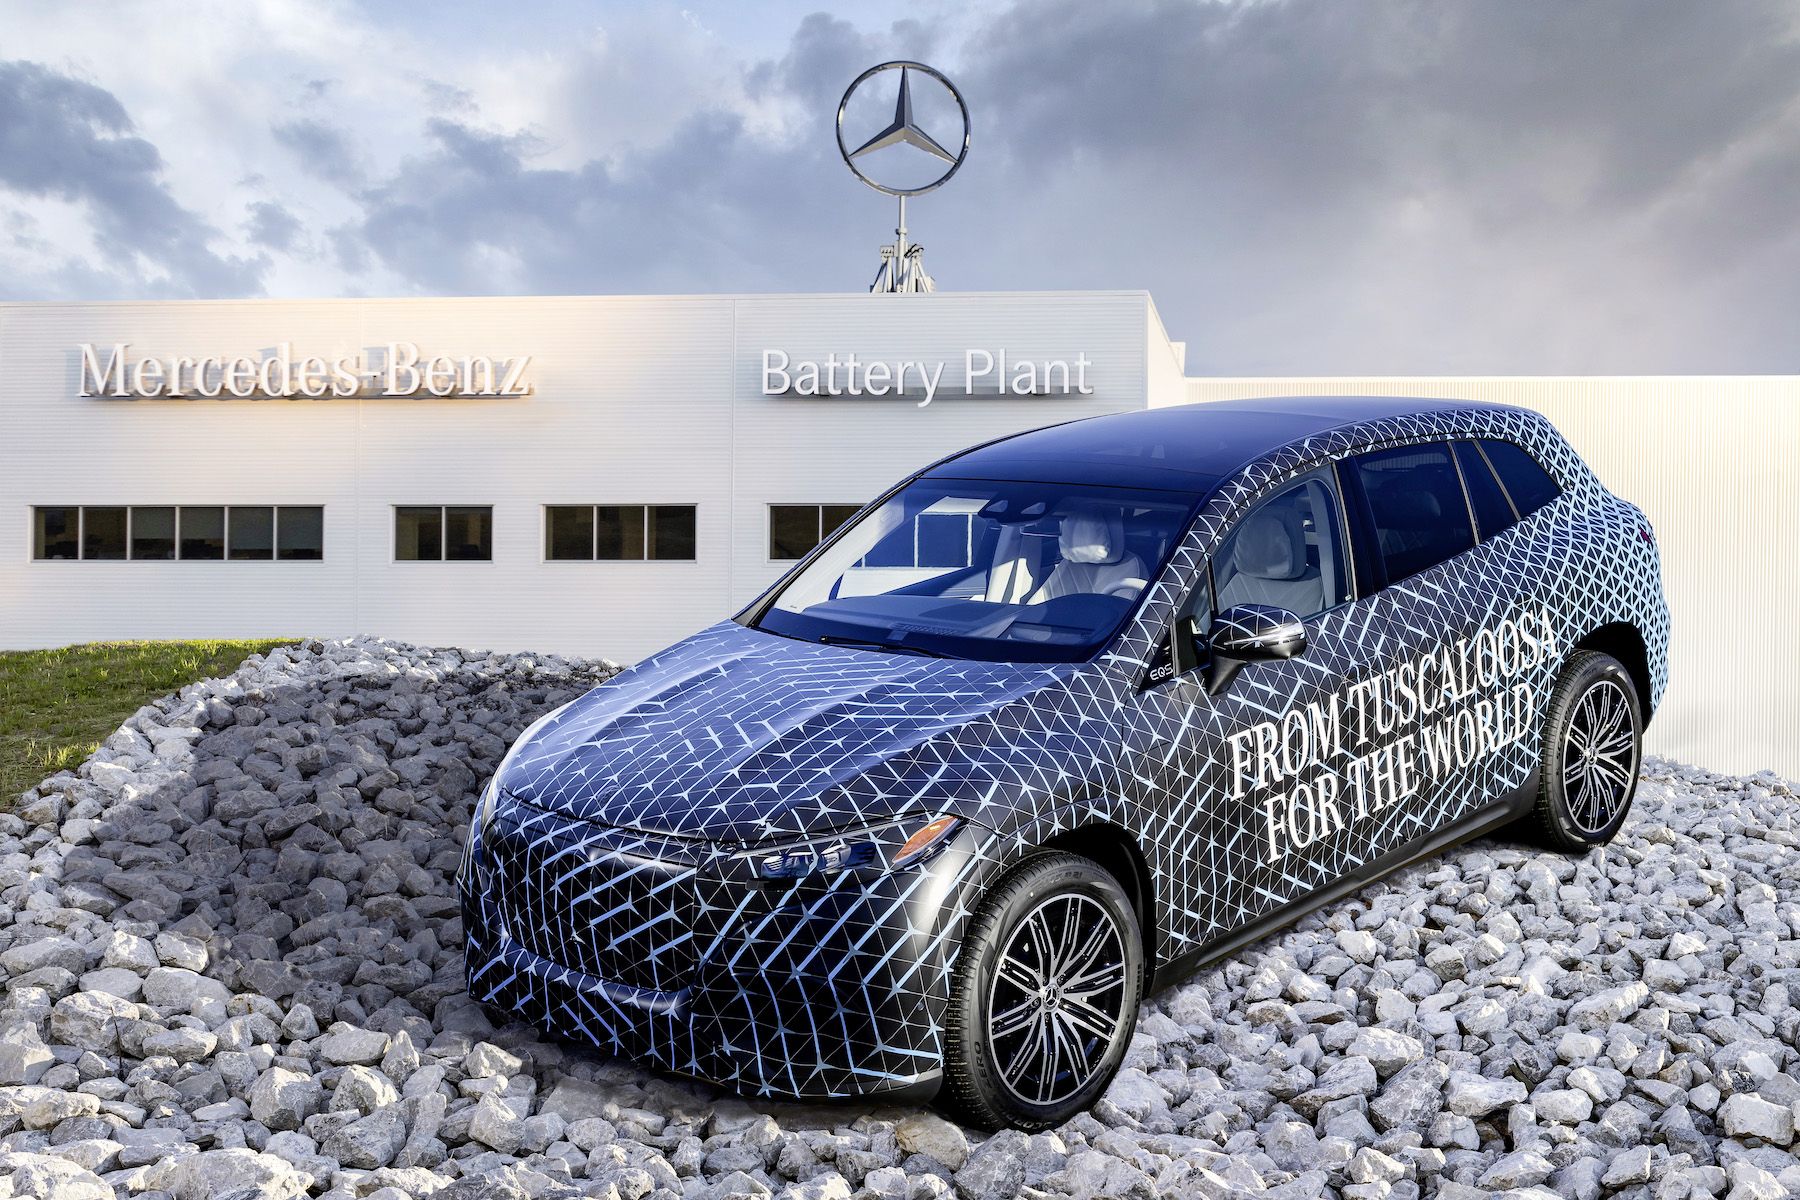 Mercedes-Benz brings battery manufacturing in-house, Stateside